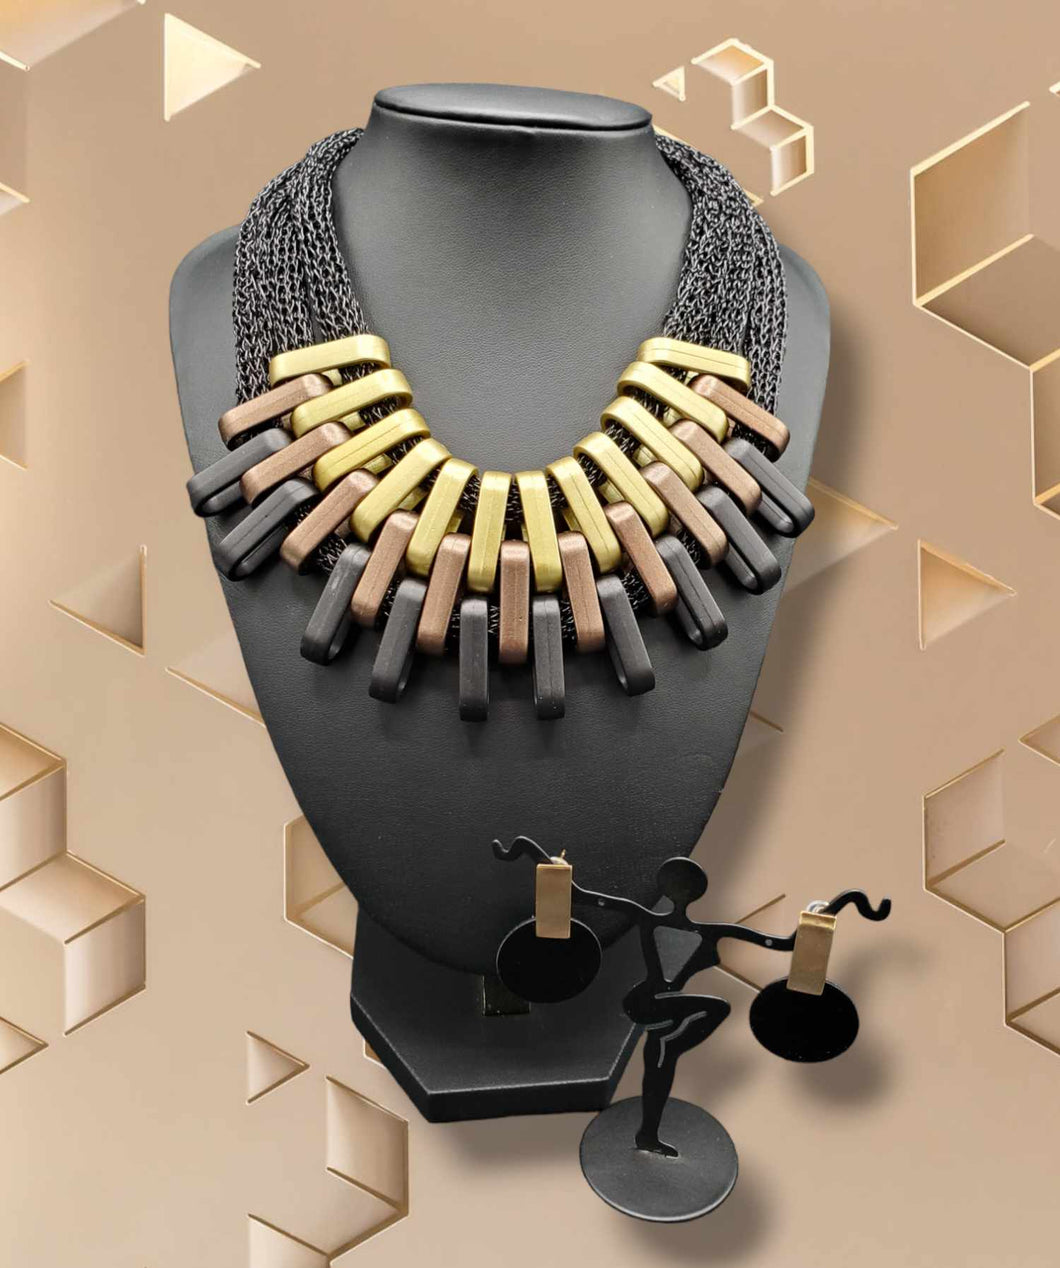 Tantalizing Trifecta-Tricolor Necklace and Earrings